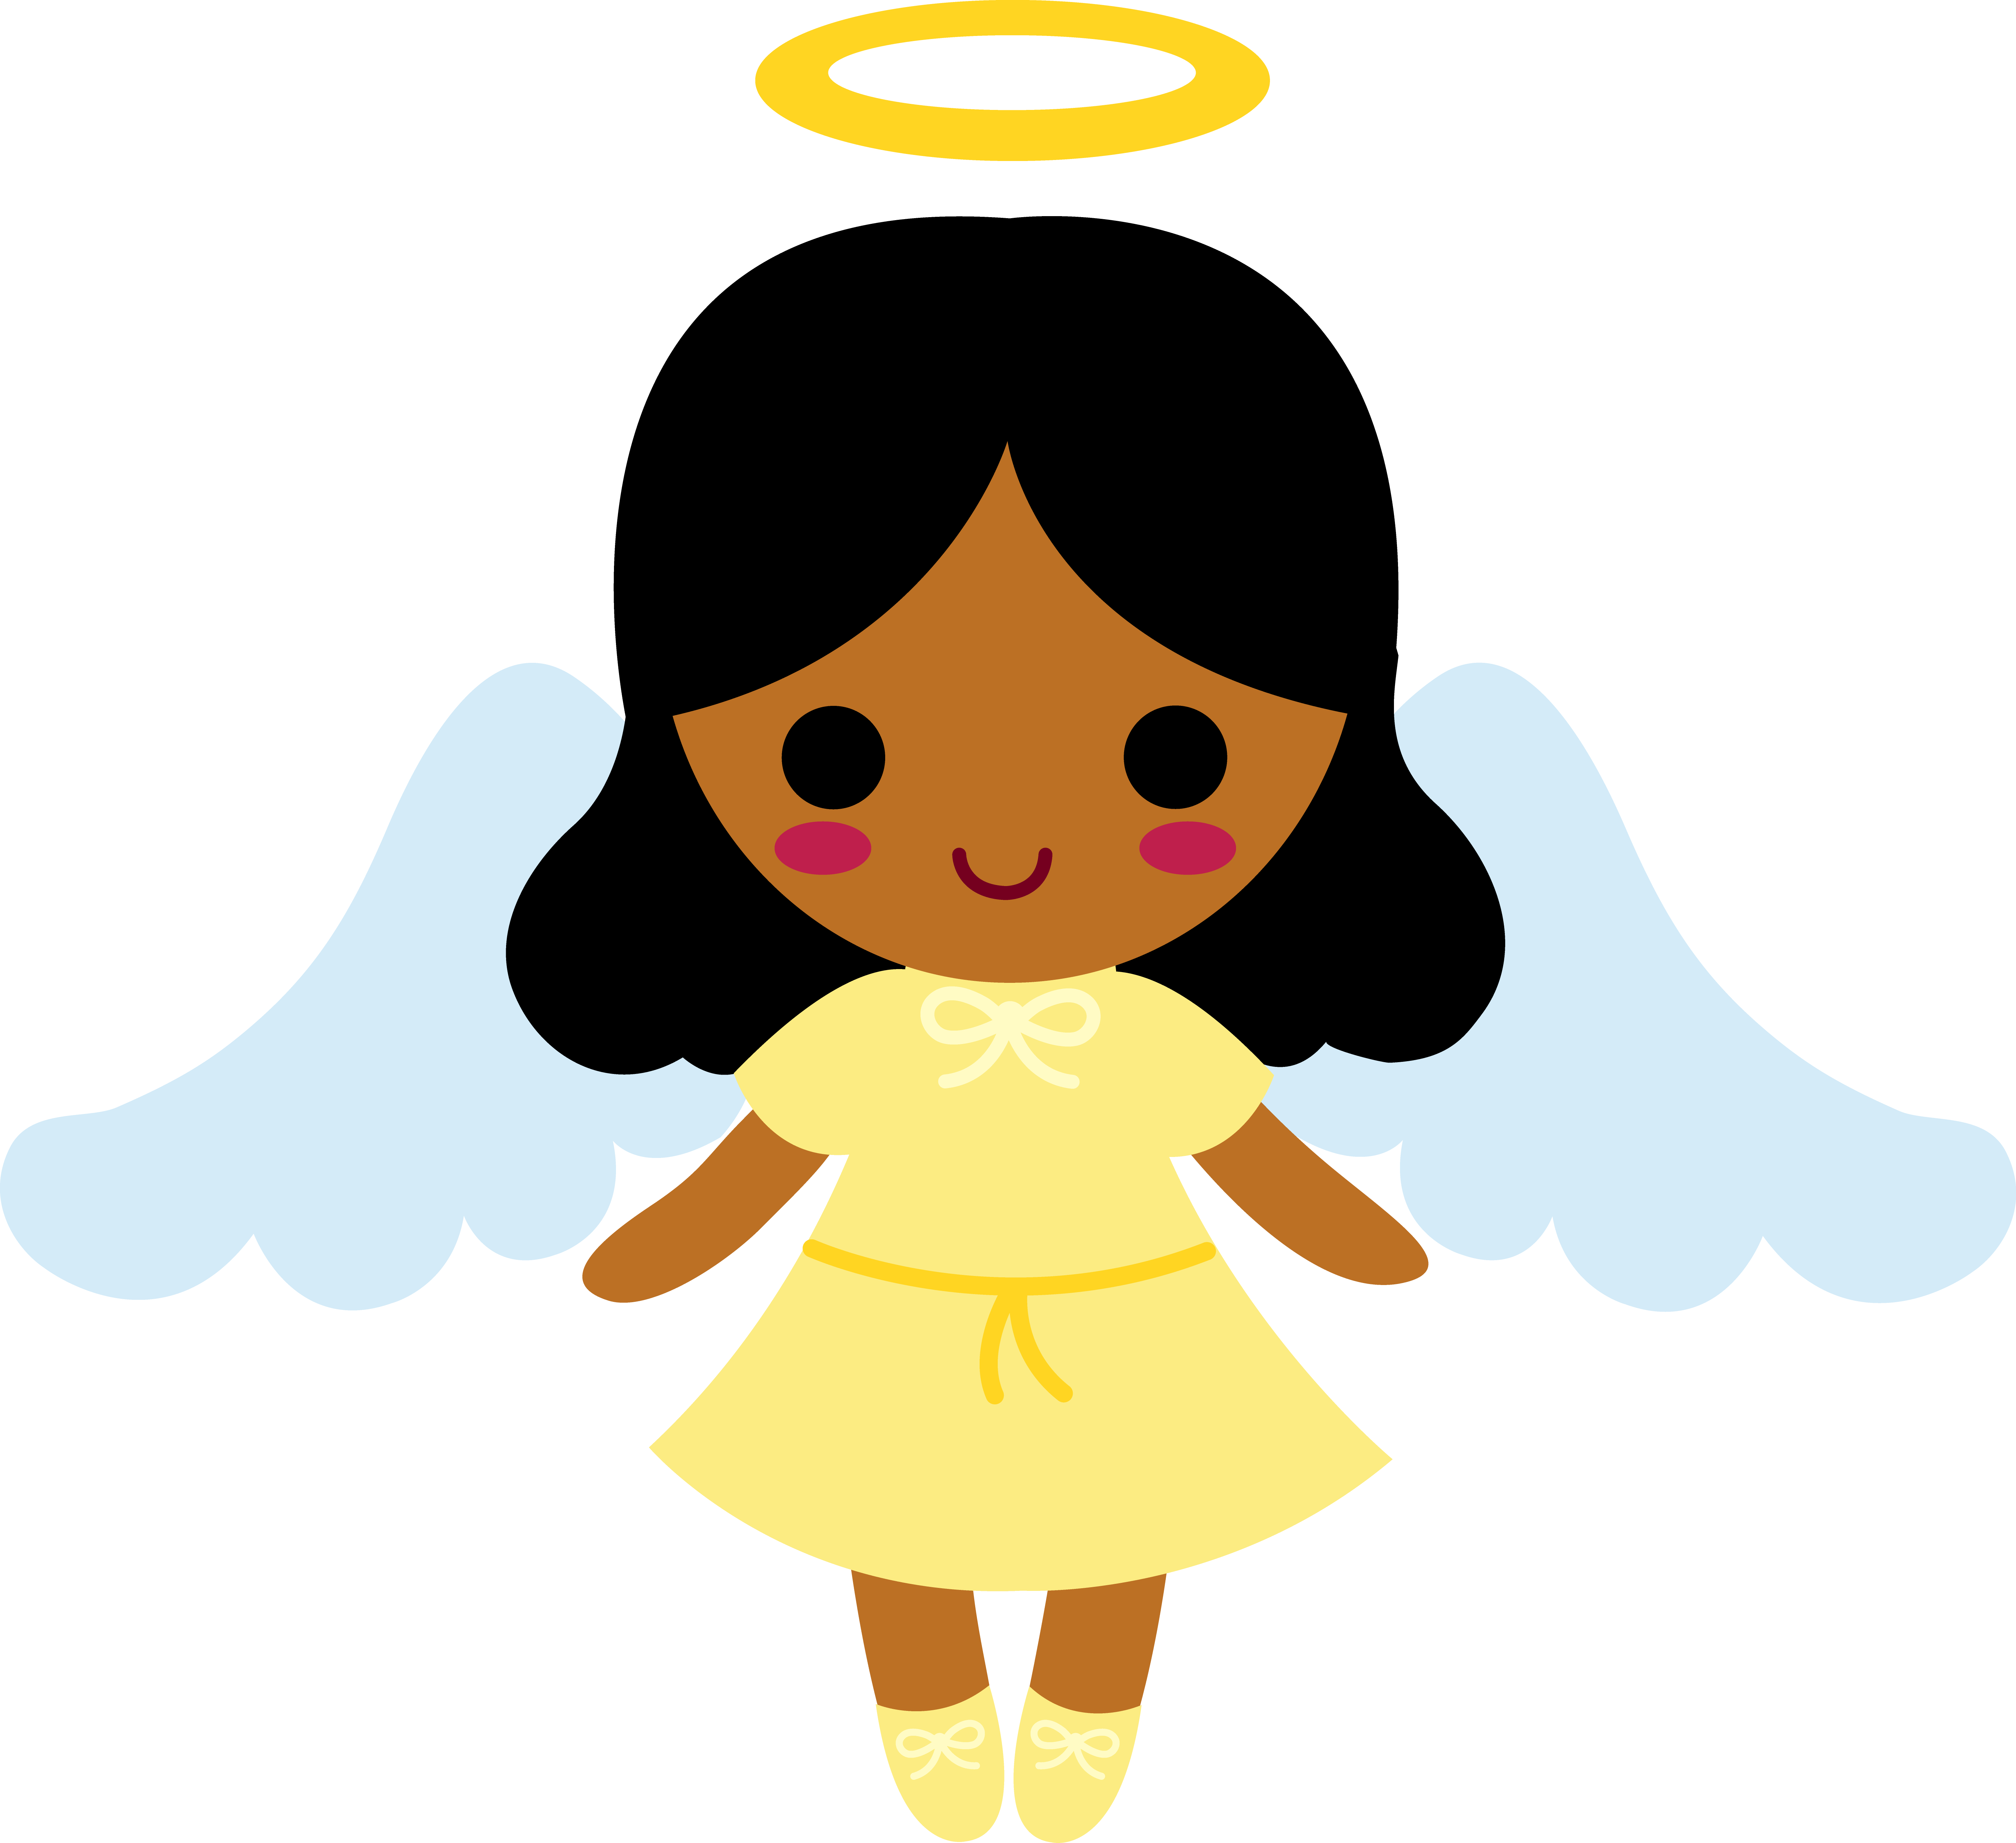 black baby angels clipart